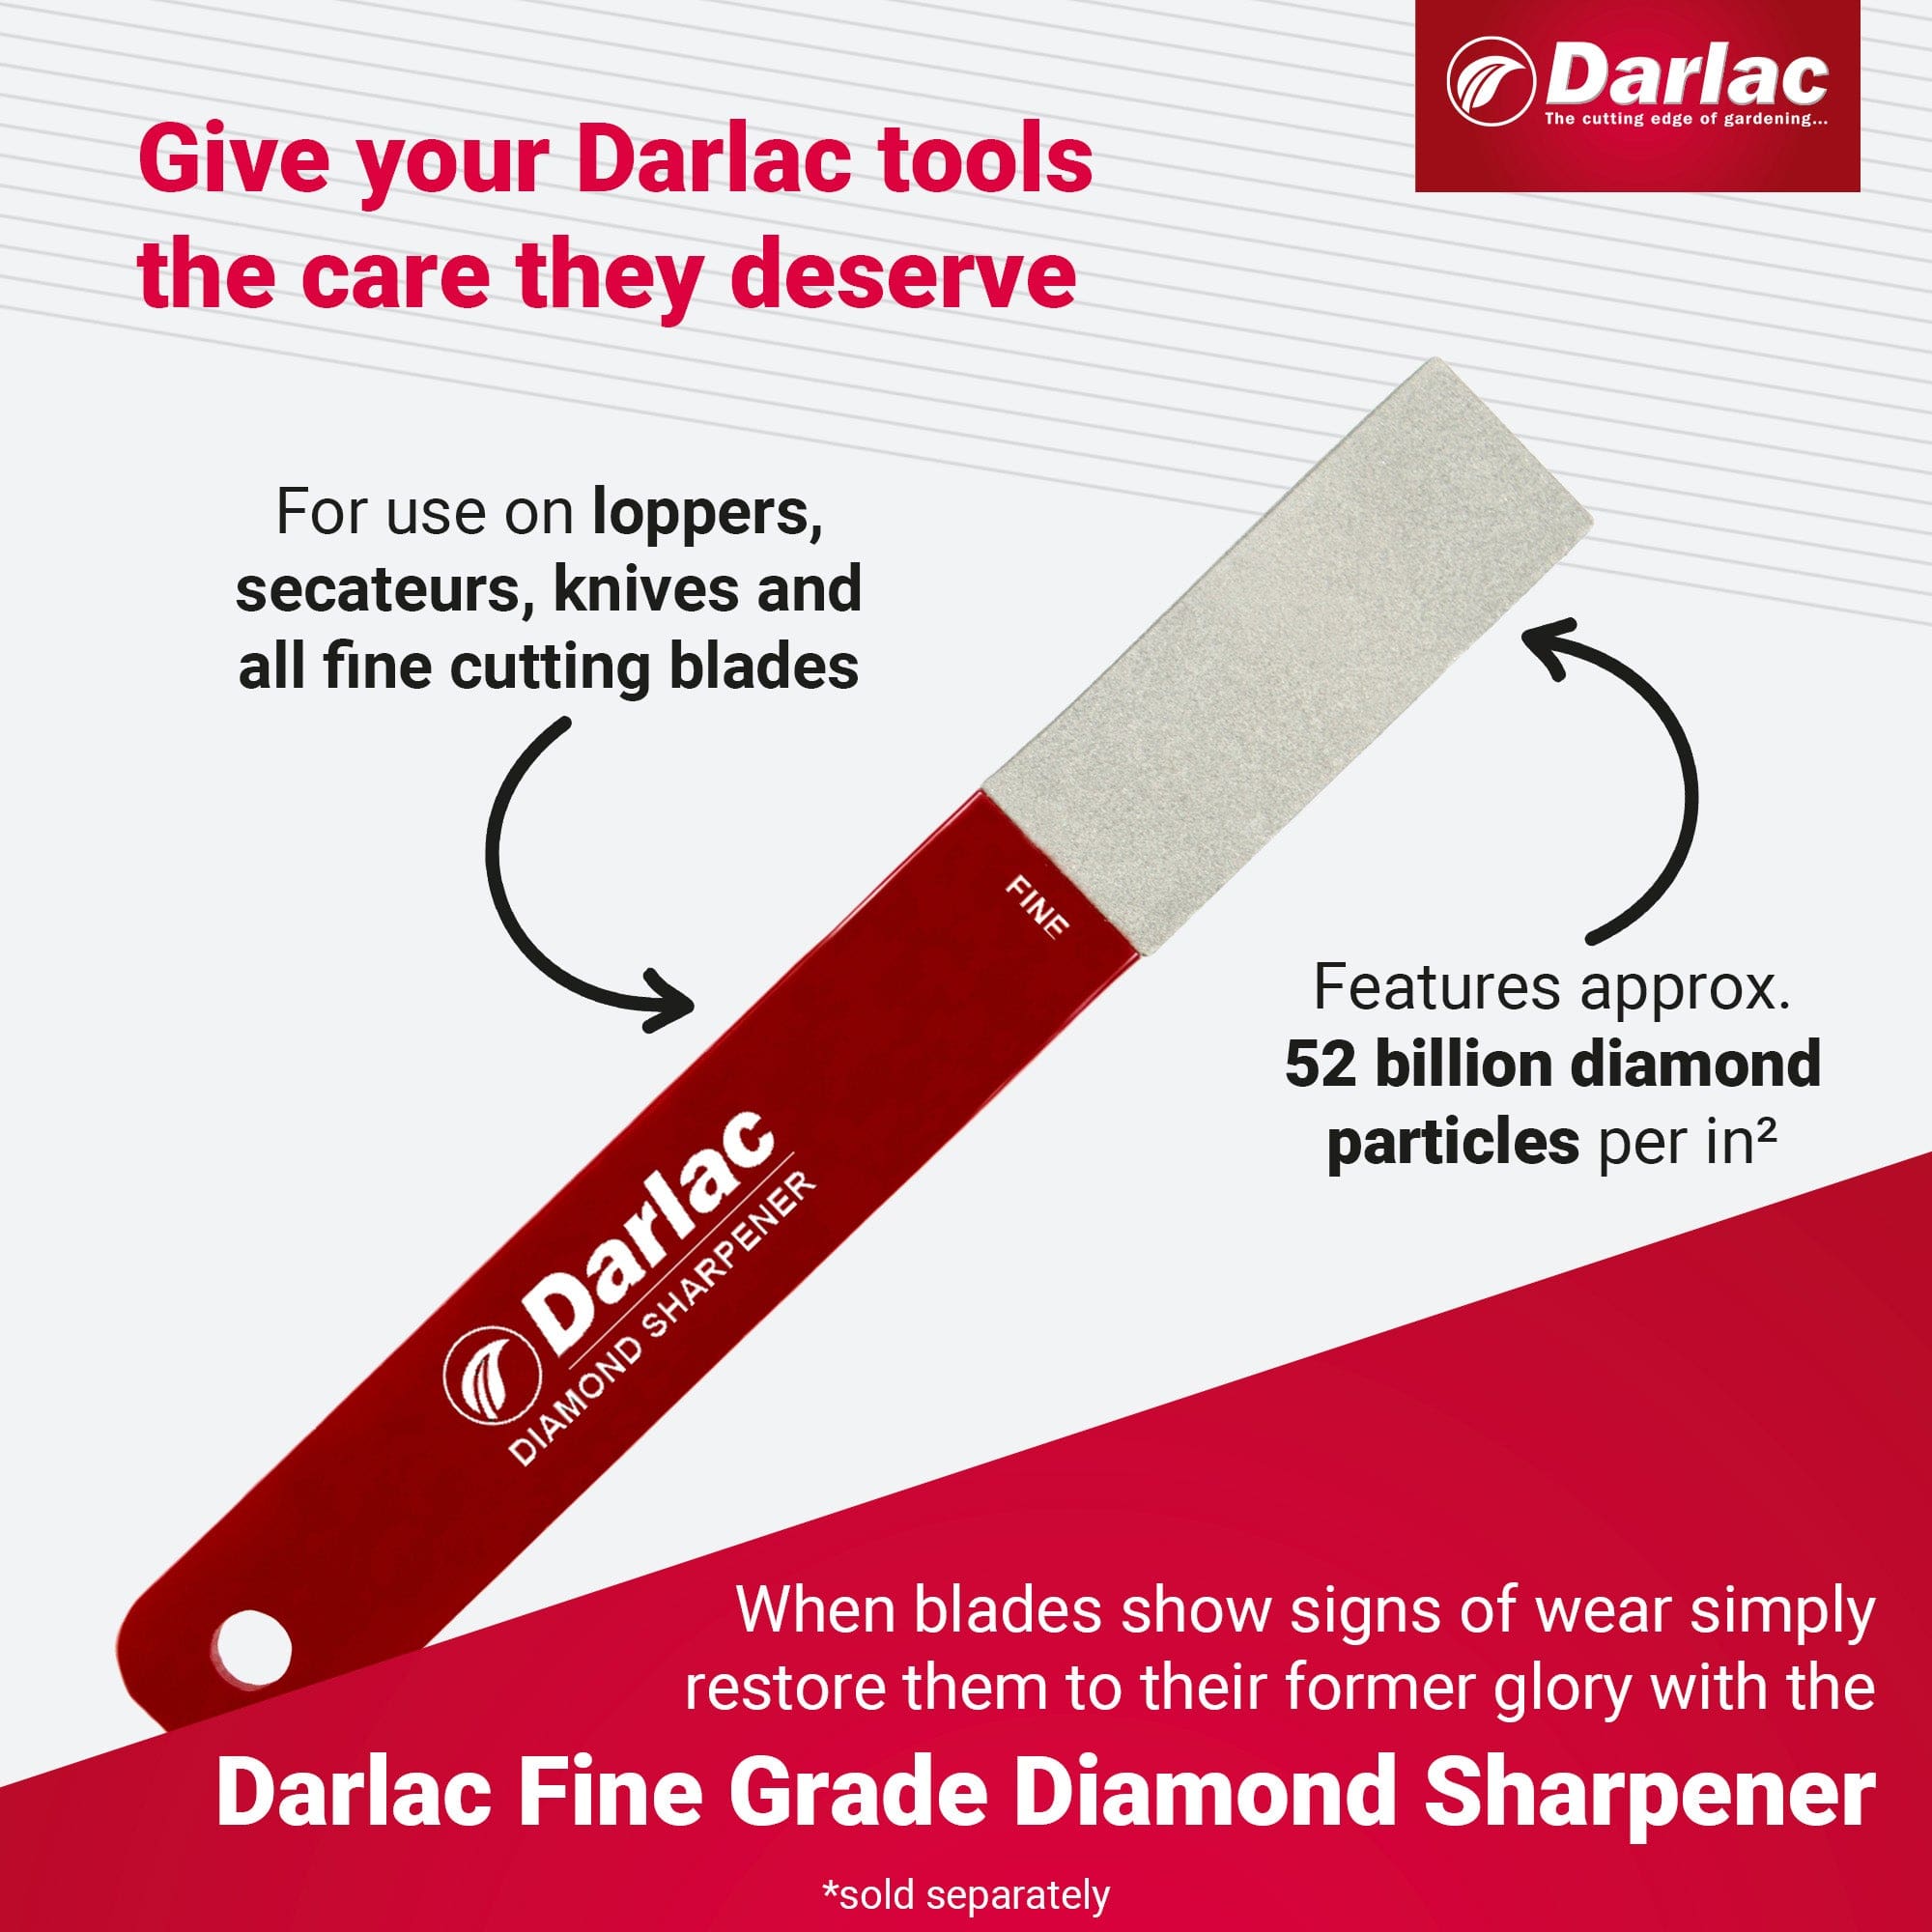 Darlac Compact Compound Action Anvil Lopper